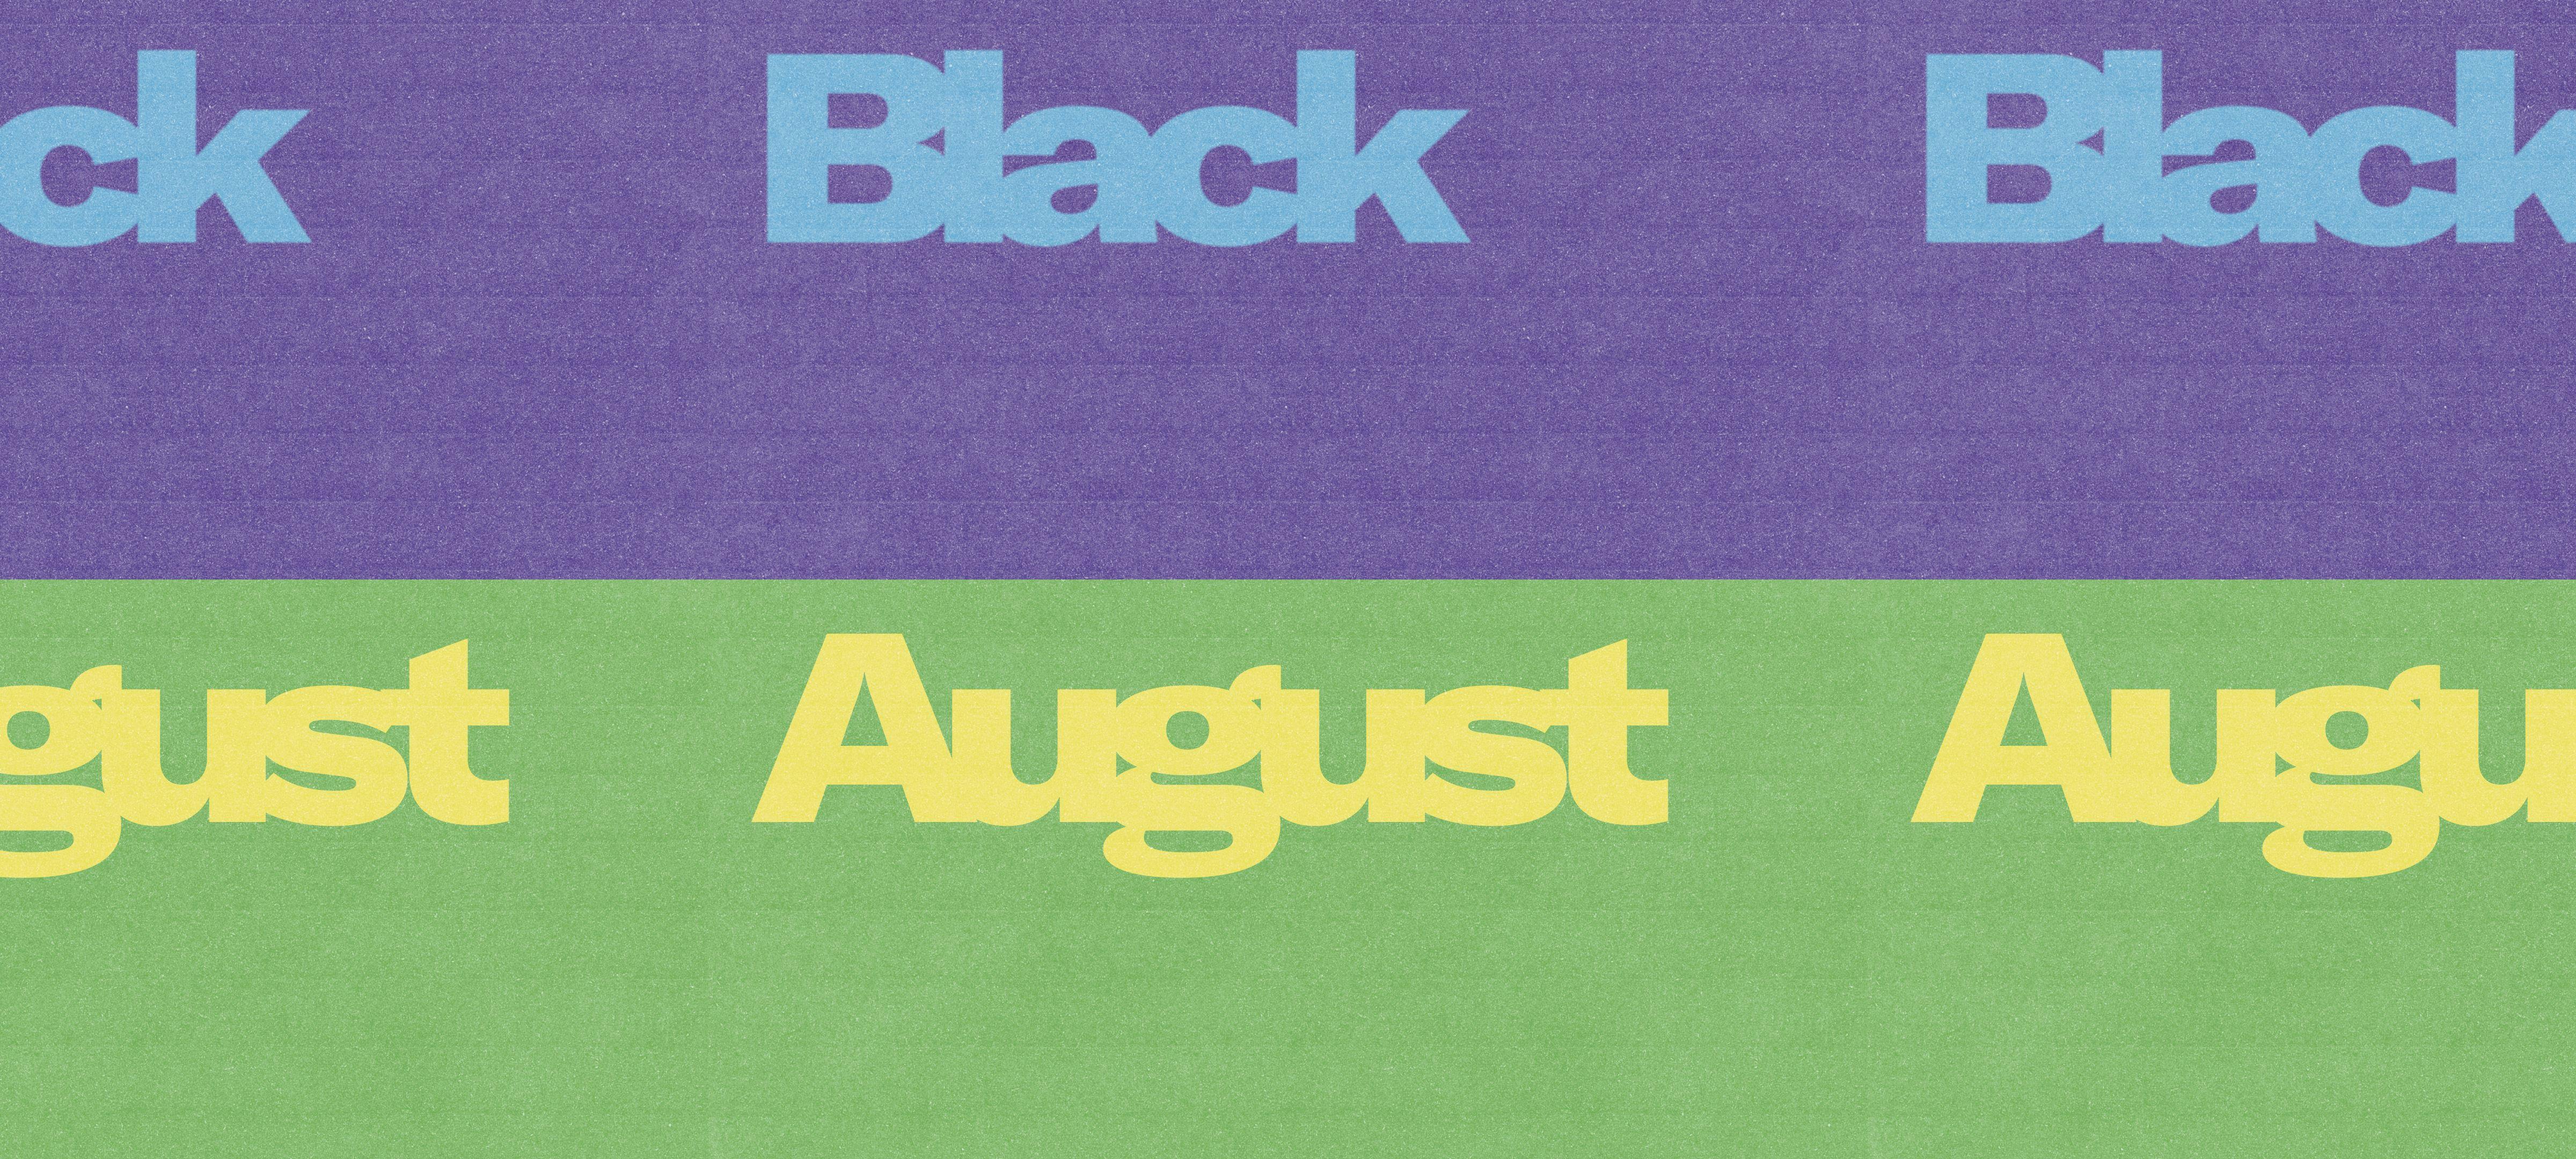 Reflecting on Black August